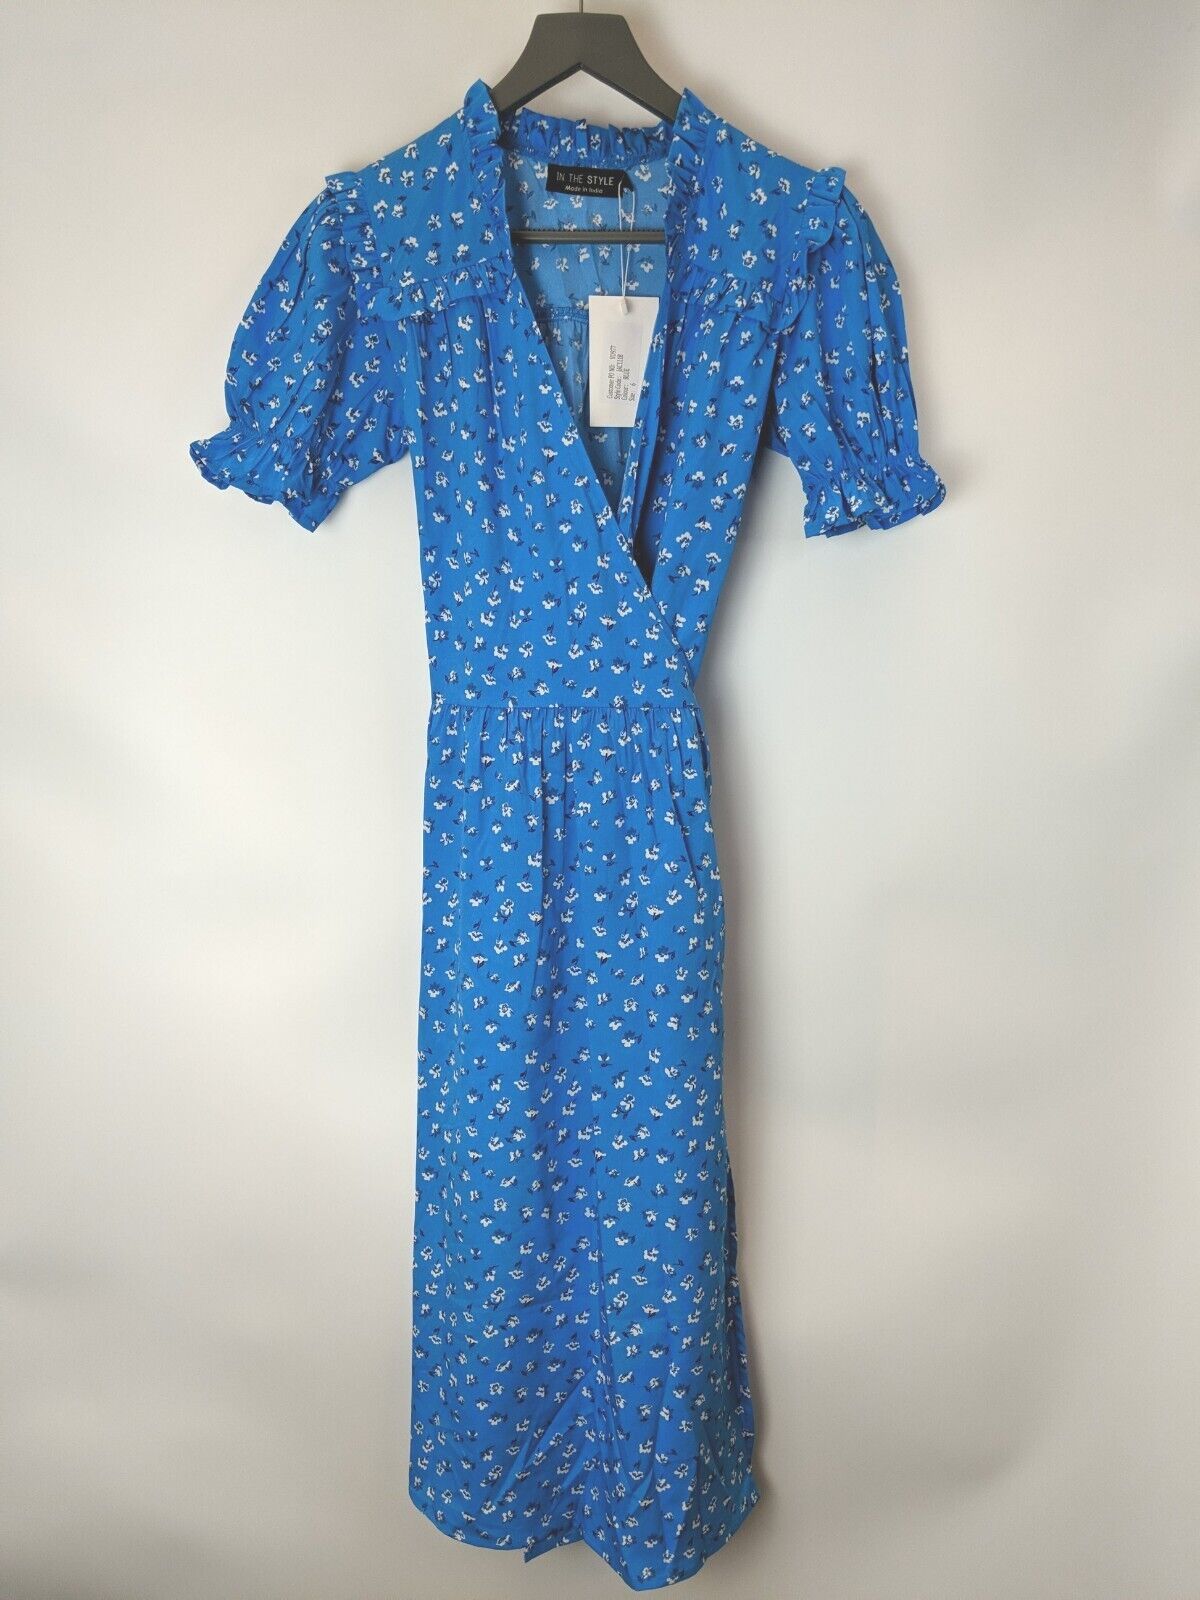 In The Style Blue Wrap Dress- Blue Floral Print. UK Size 10